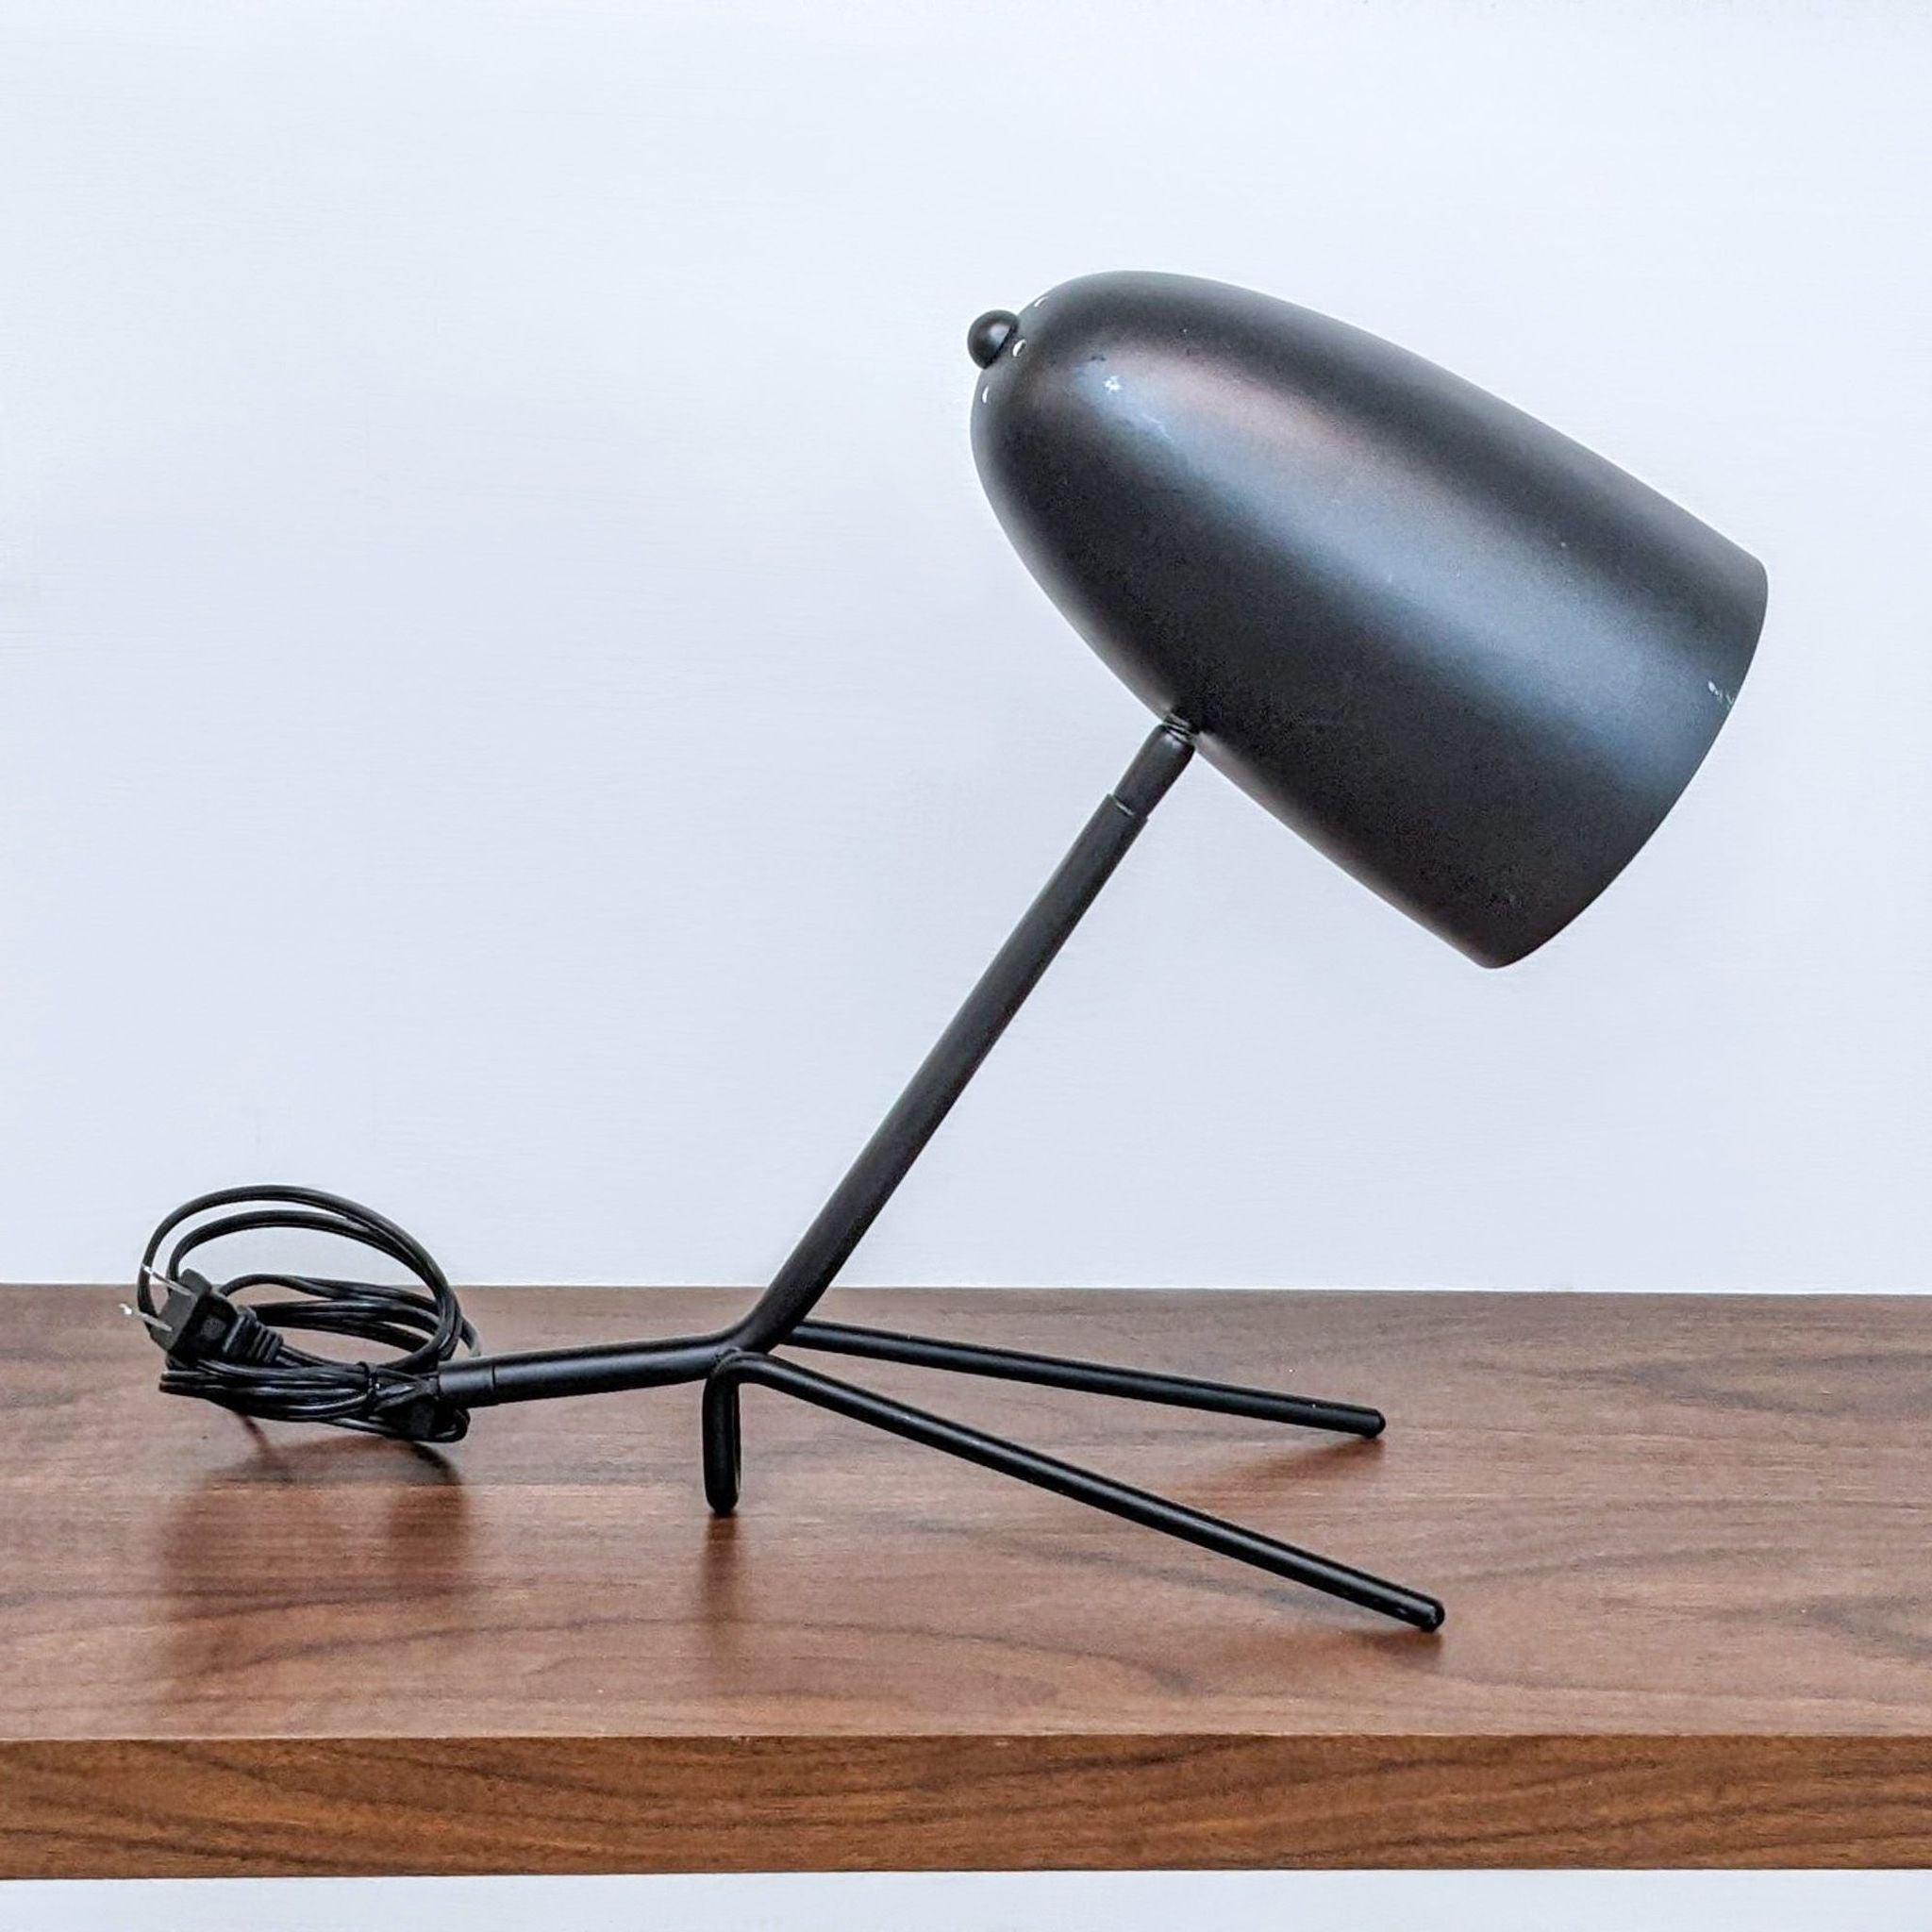 Reperch brand black desk lamp with an adjustable shade and tripod base on a wooden surface.